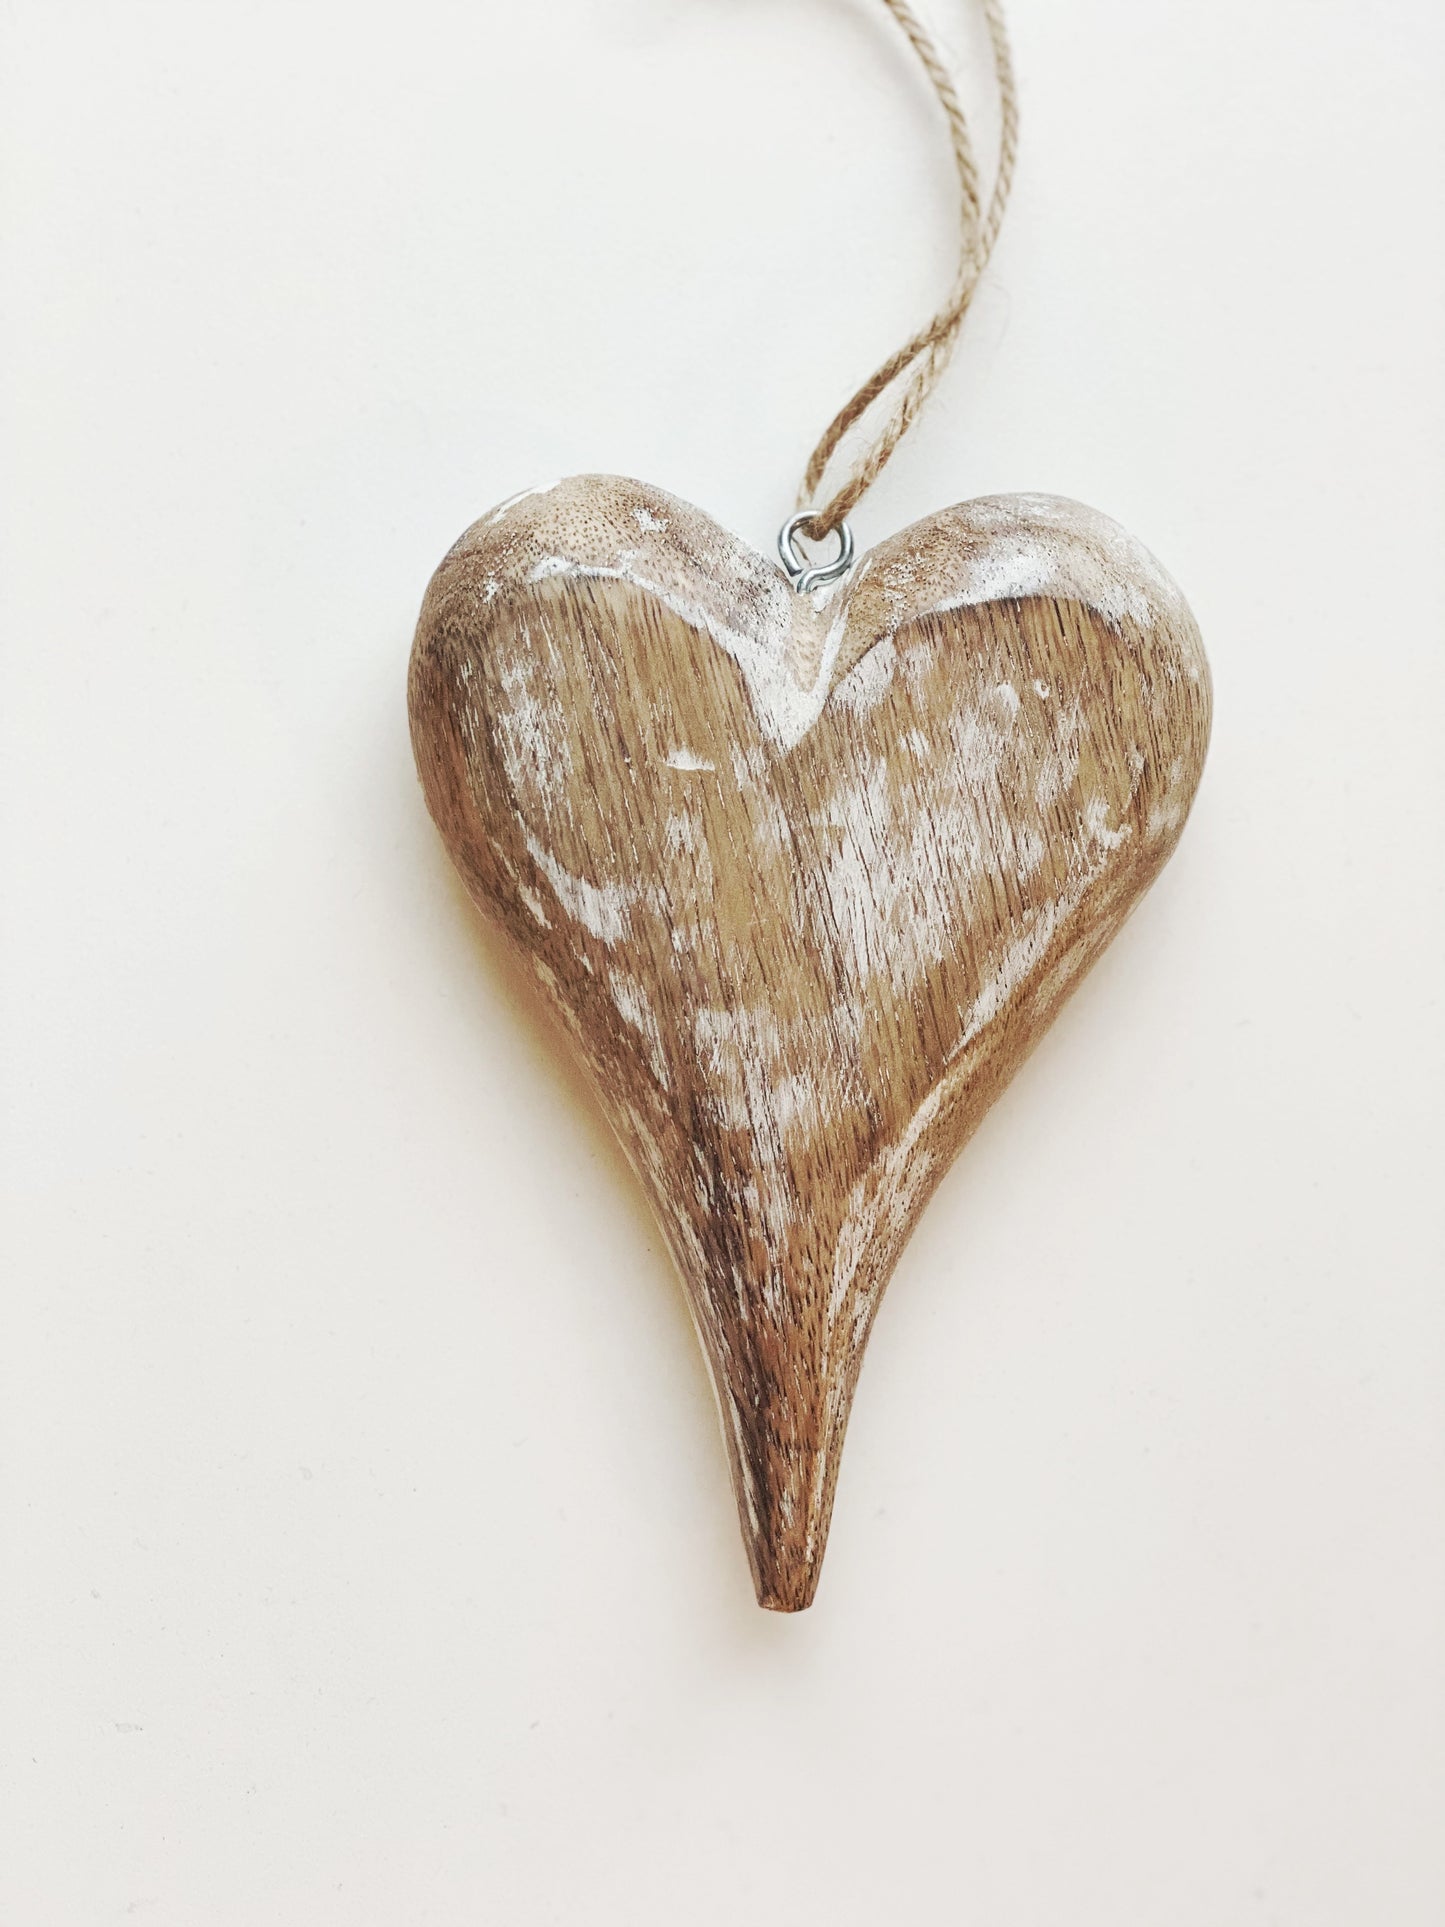 Whitewashed Wooden Heart Ornament